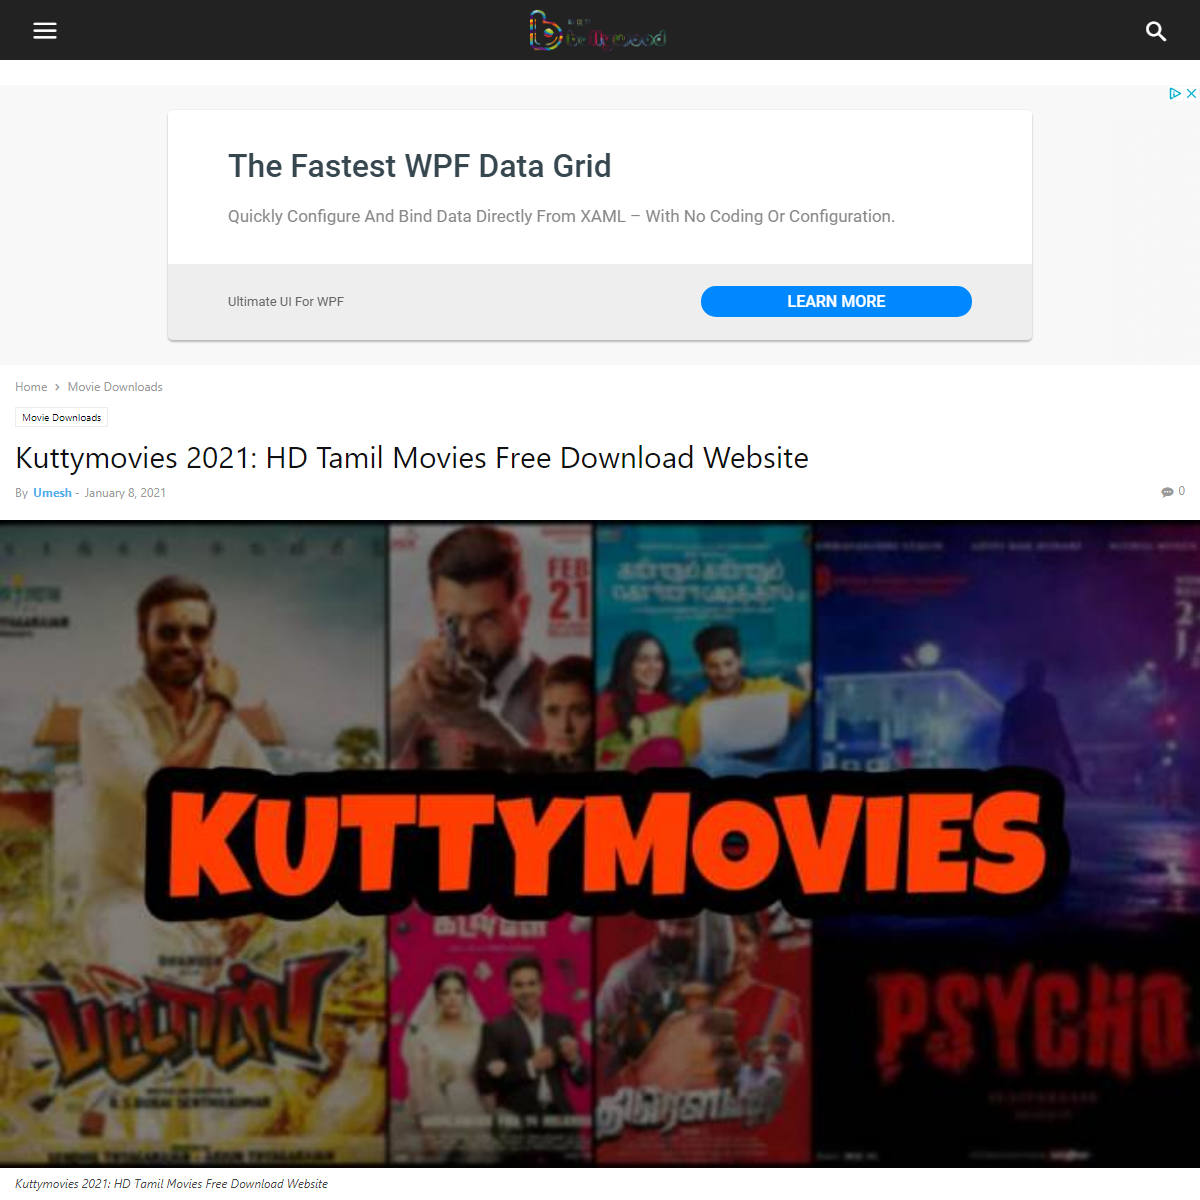 A complete backup of https://blogtobollywood.com/kuttymovies/